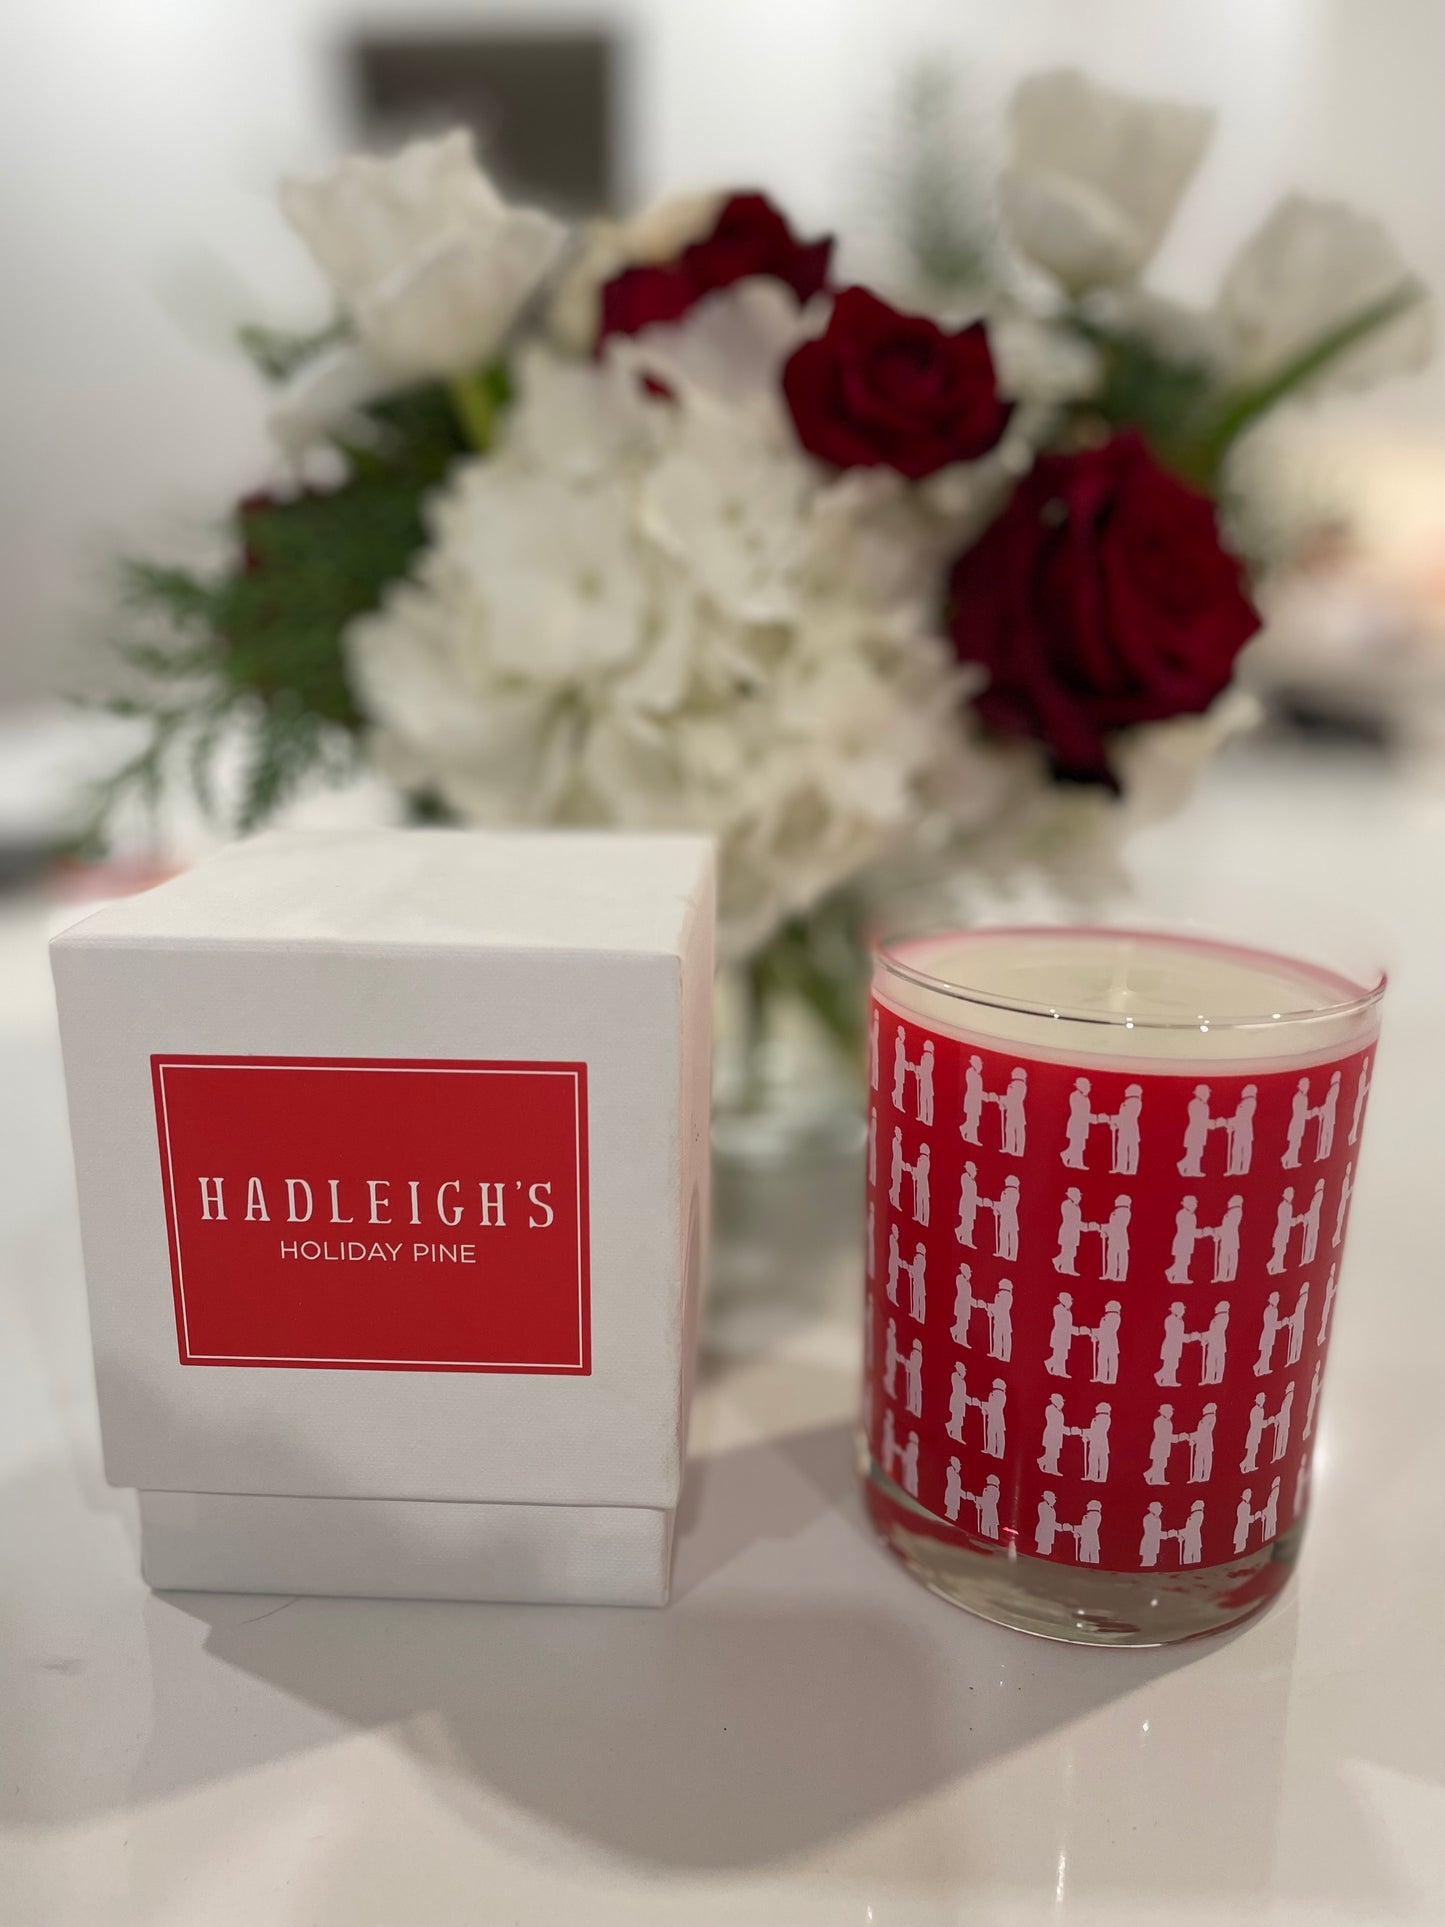 Hadleighs Holiday Pine Candle